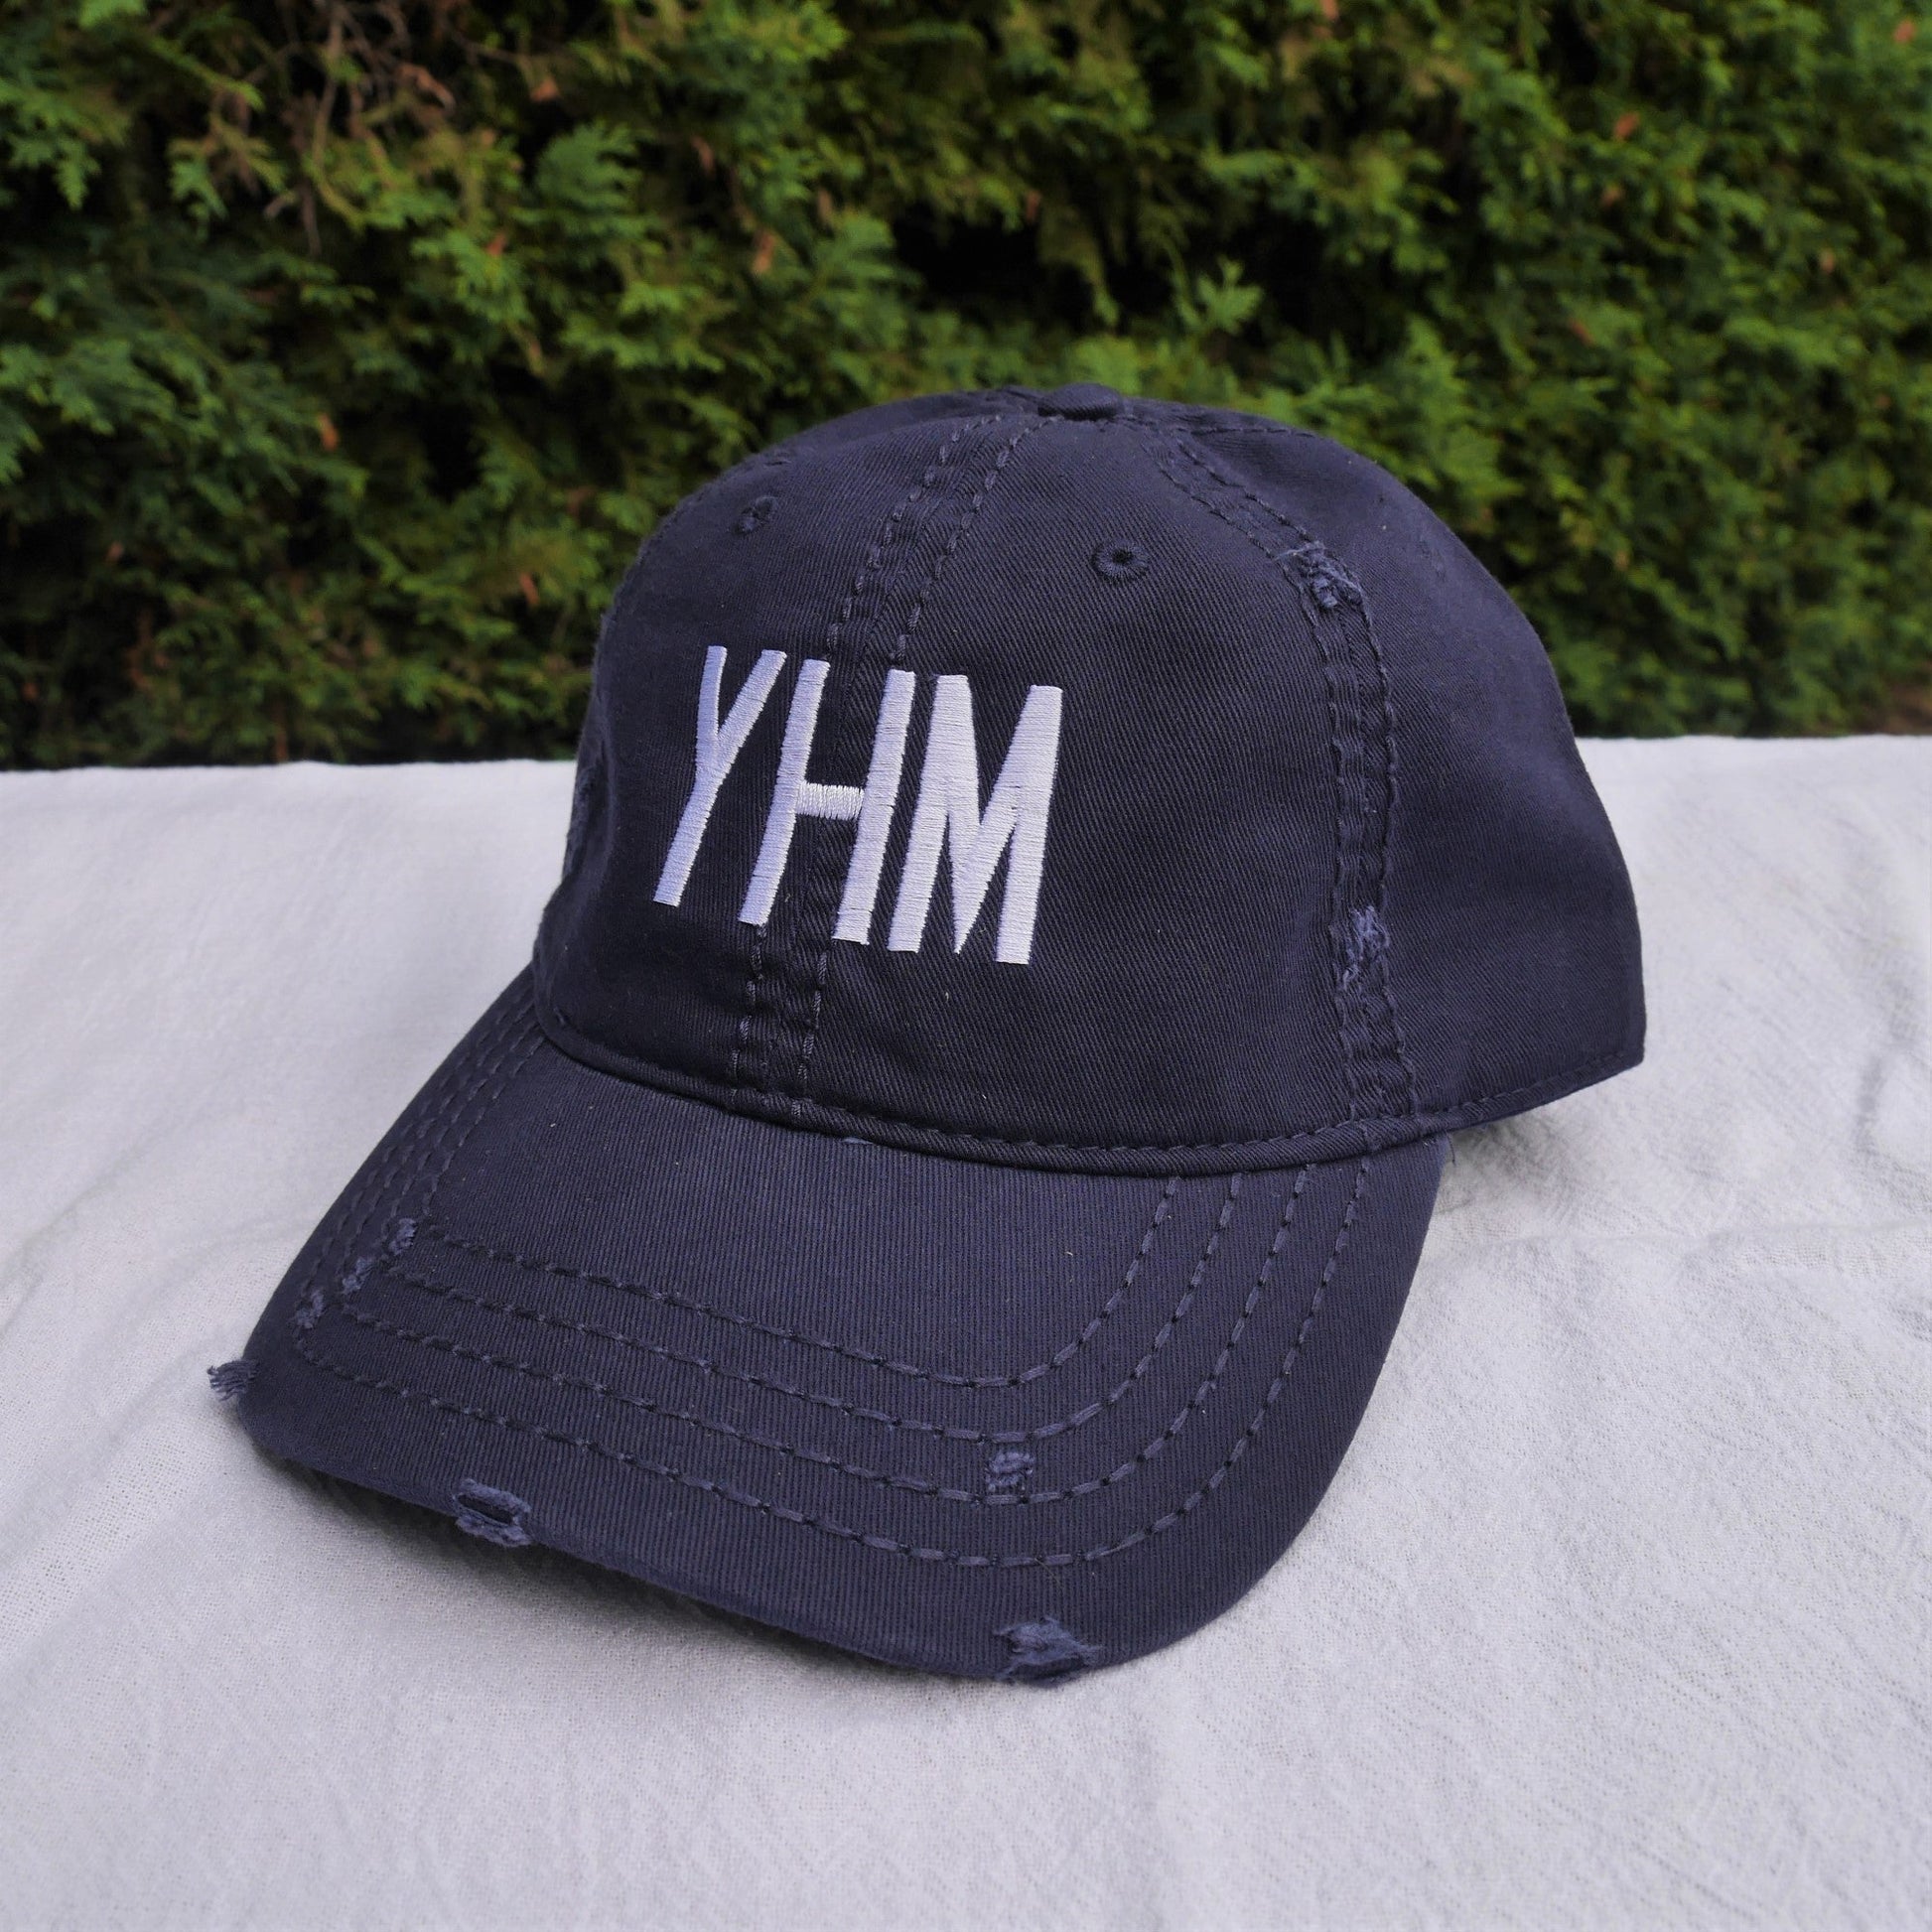 Airport Code Twill Cap - White • YAM Sault-Ste-Marie • YHM Designs - Image 34